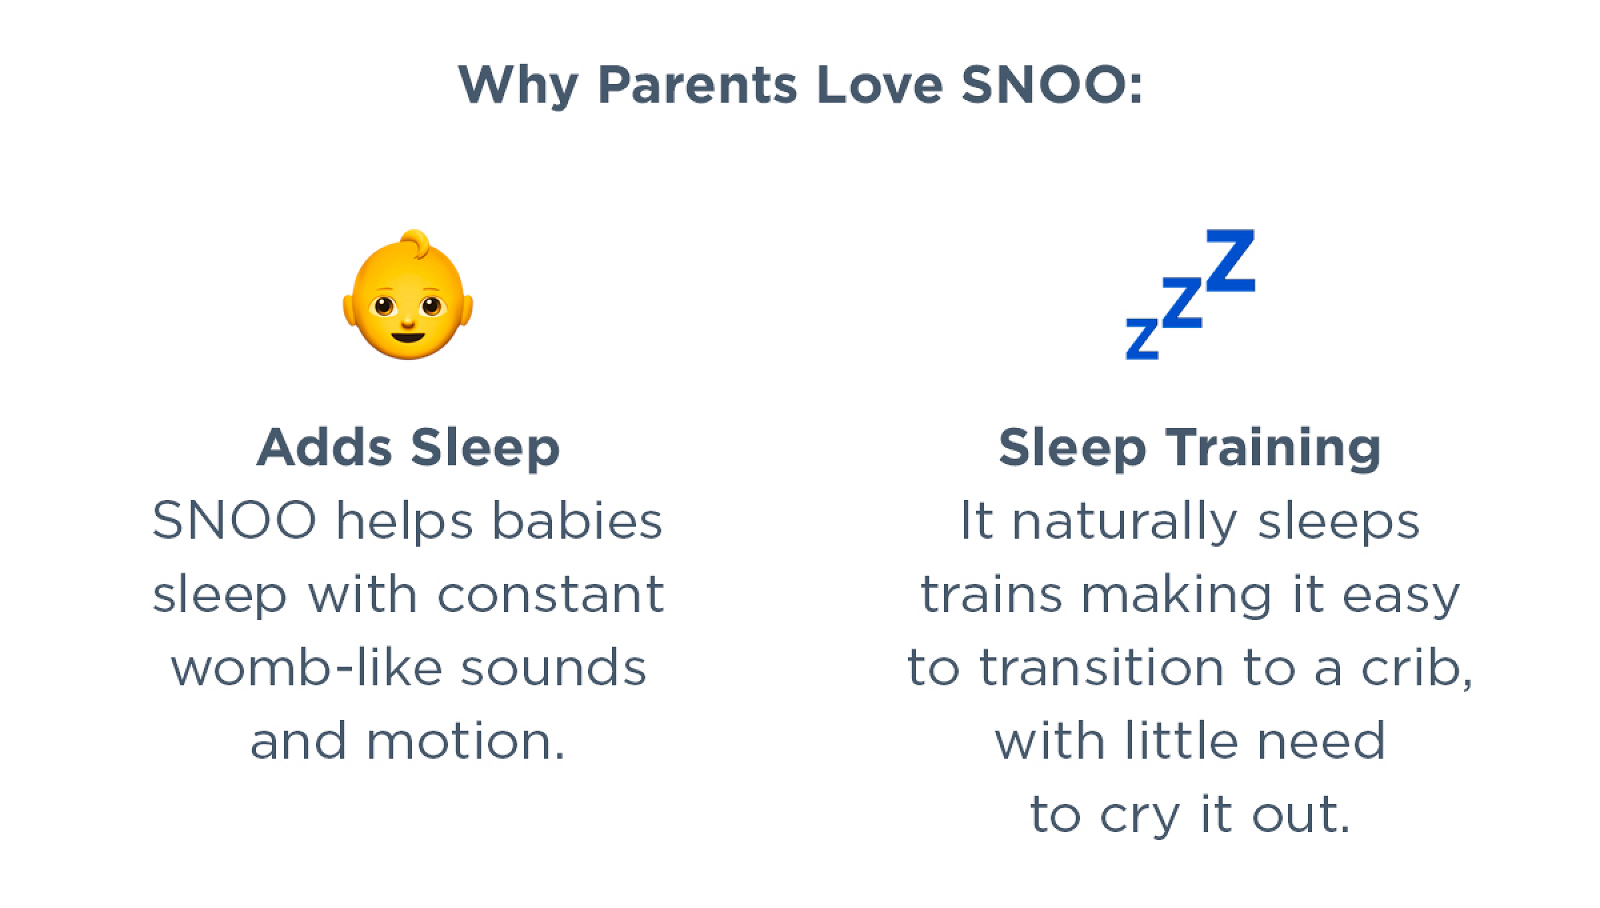 Why parents love SNOO: Adds sleep. SNOO helps babies sleep with constant womb-like sounds and motion. Sleep Training. It naturally sleep trains making it easy to transition to a crib, with little need to cry it out.